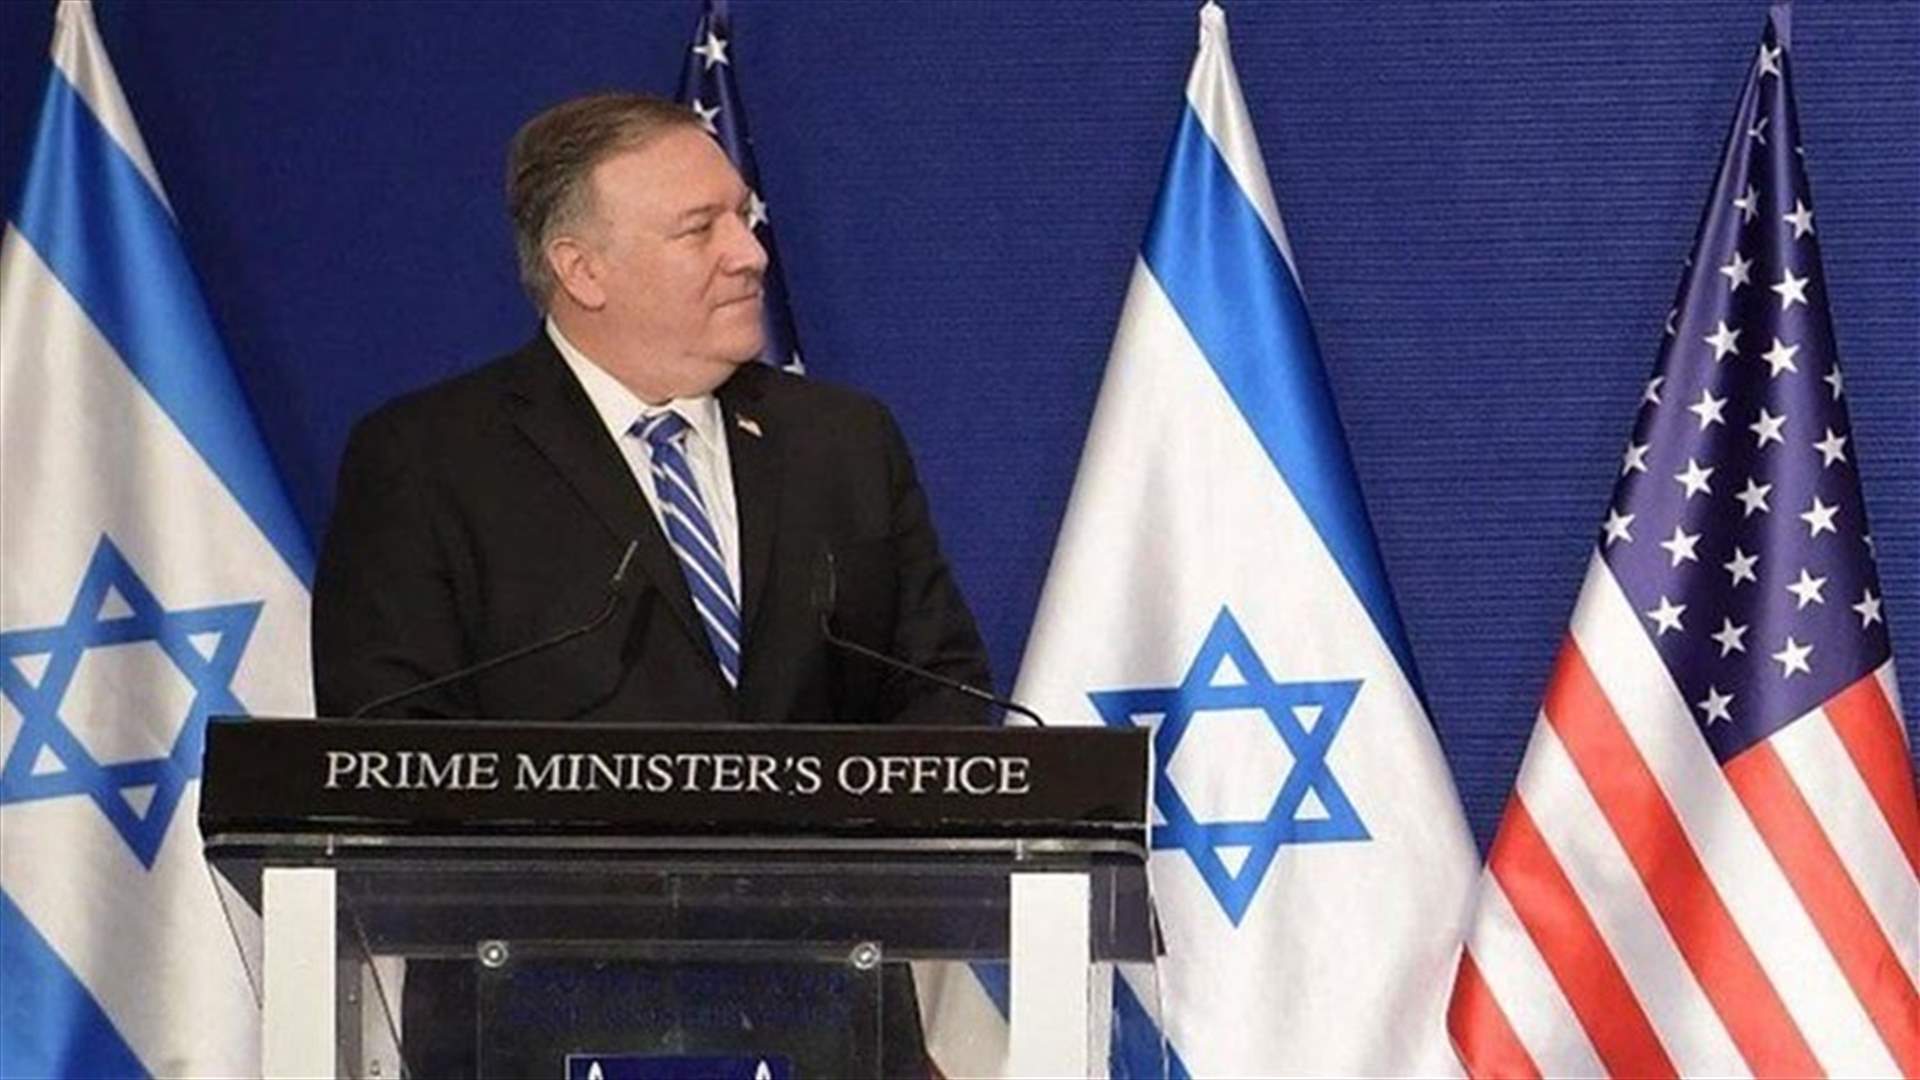 Pompeo: Negotiation on maritime borders has potential to yield increased stability, security and prosperity for Lebanon, Israel